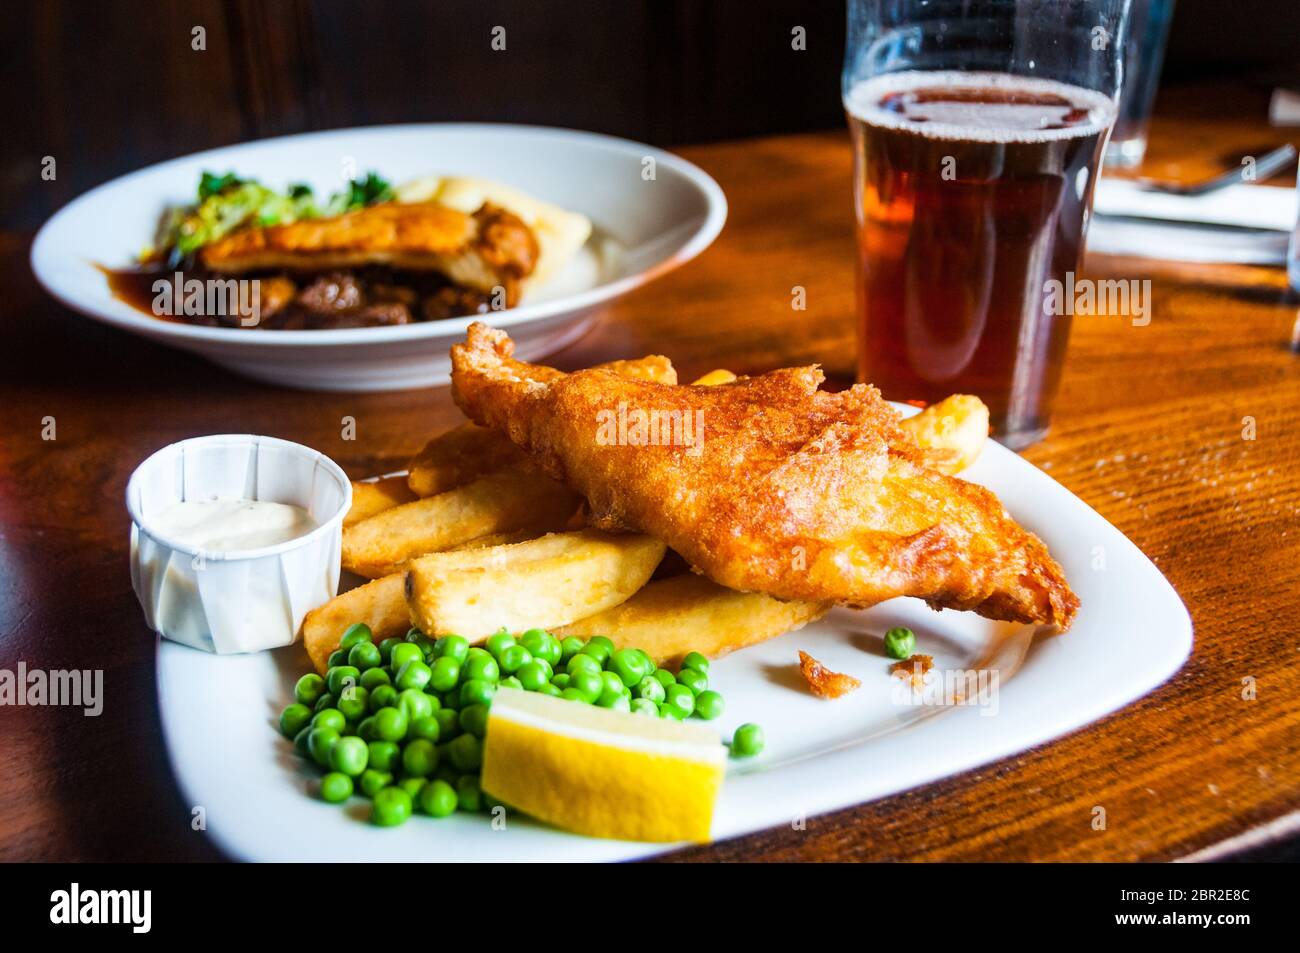 A traditional British pub meal with fish and chips and a steak and mushroom pie along with a pint of bitter. Stock Photo